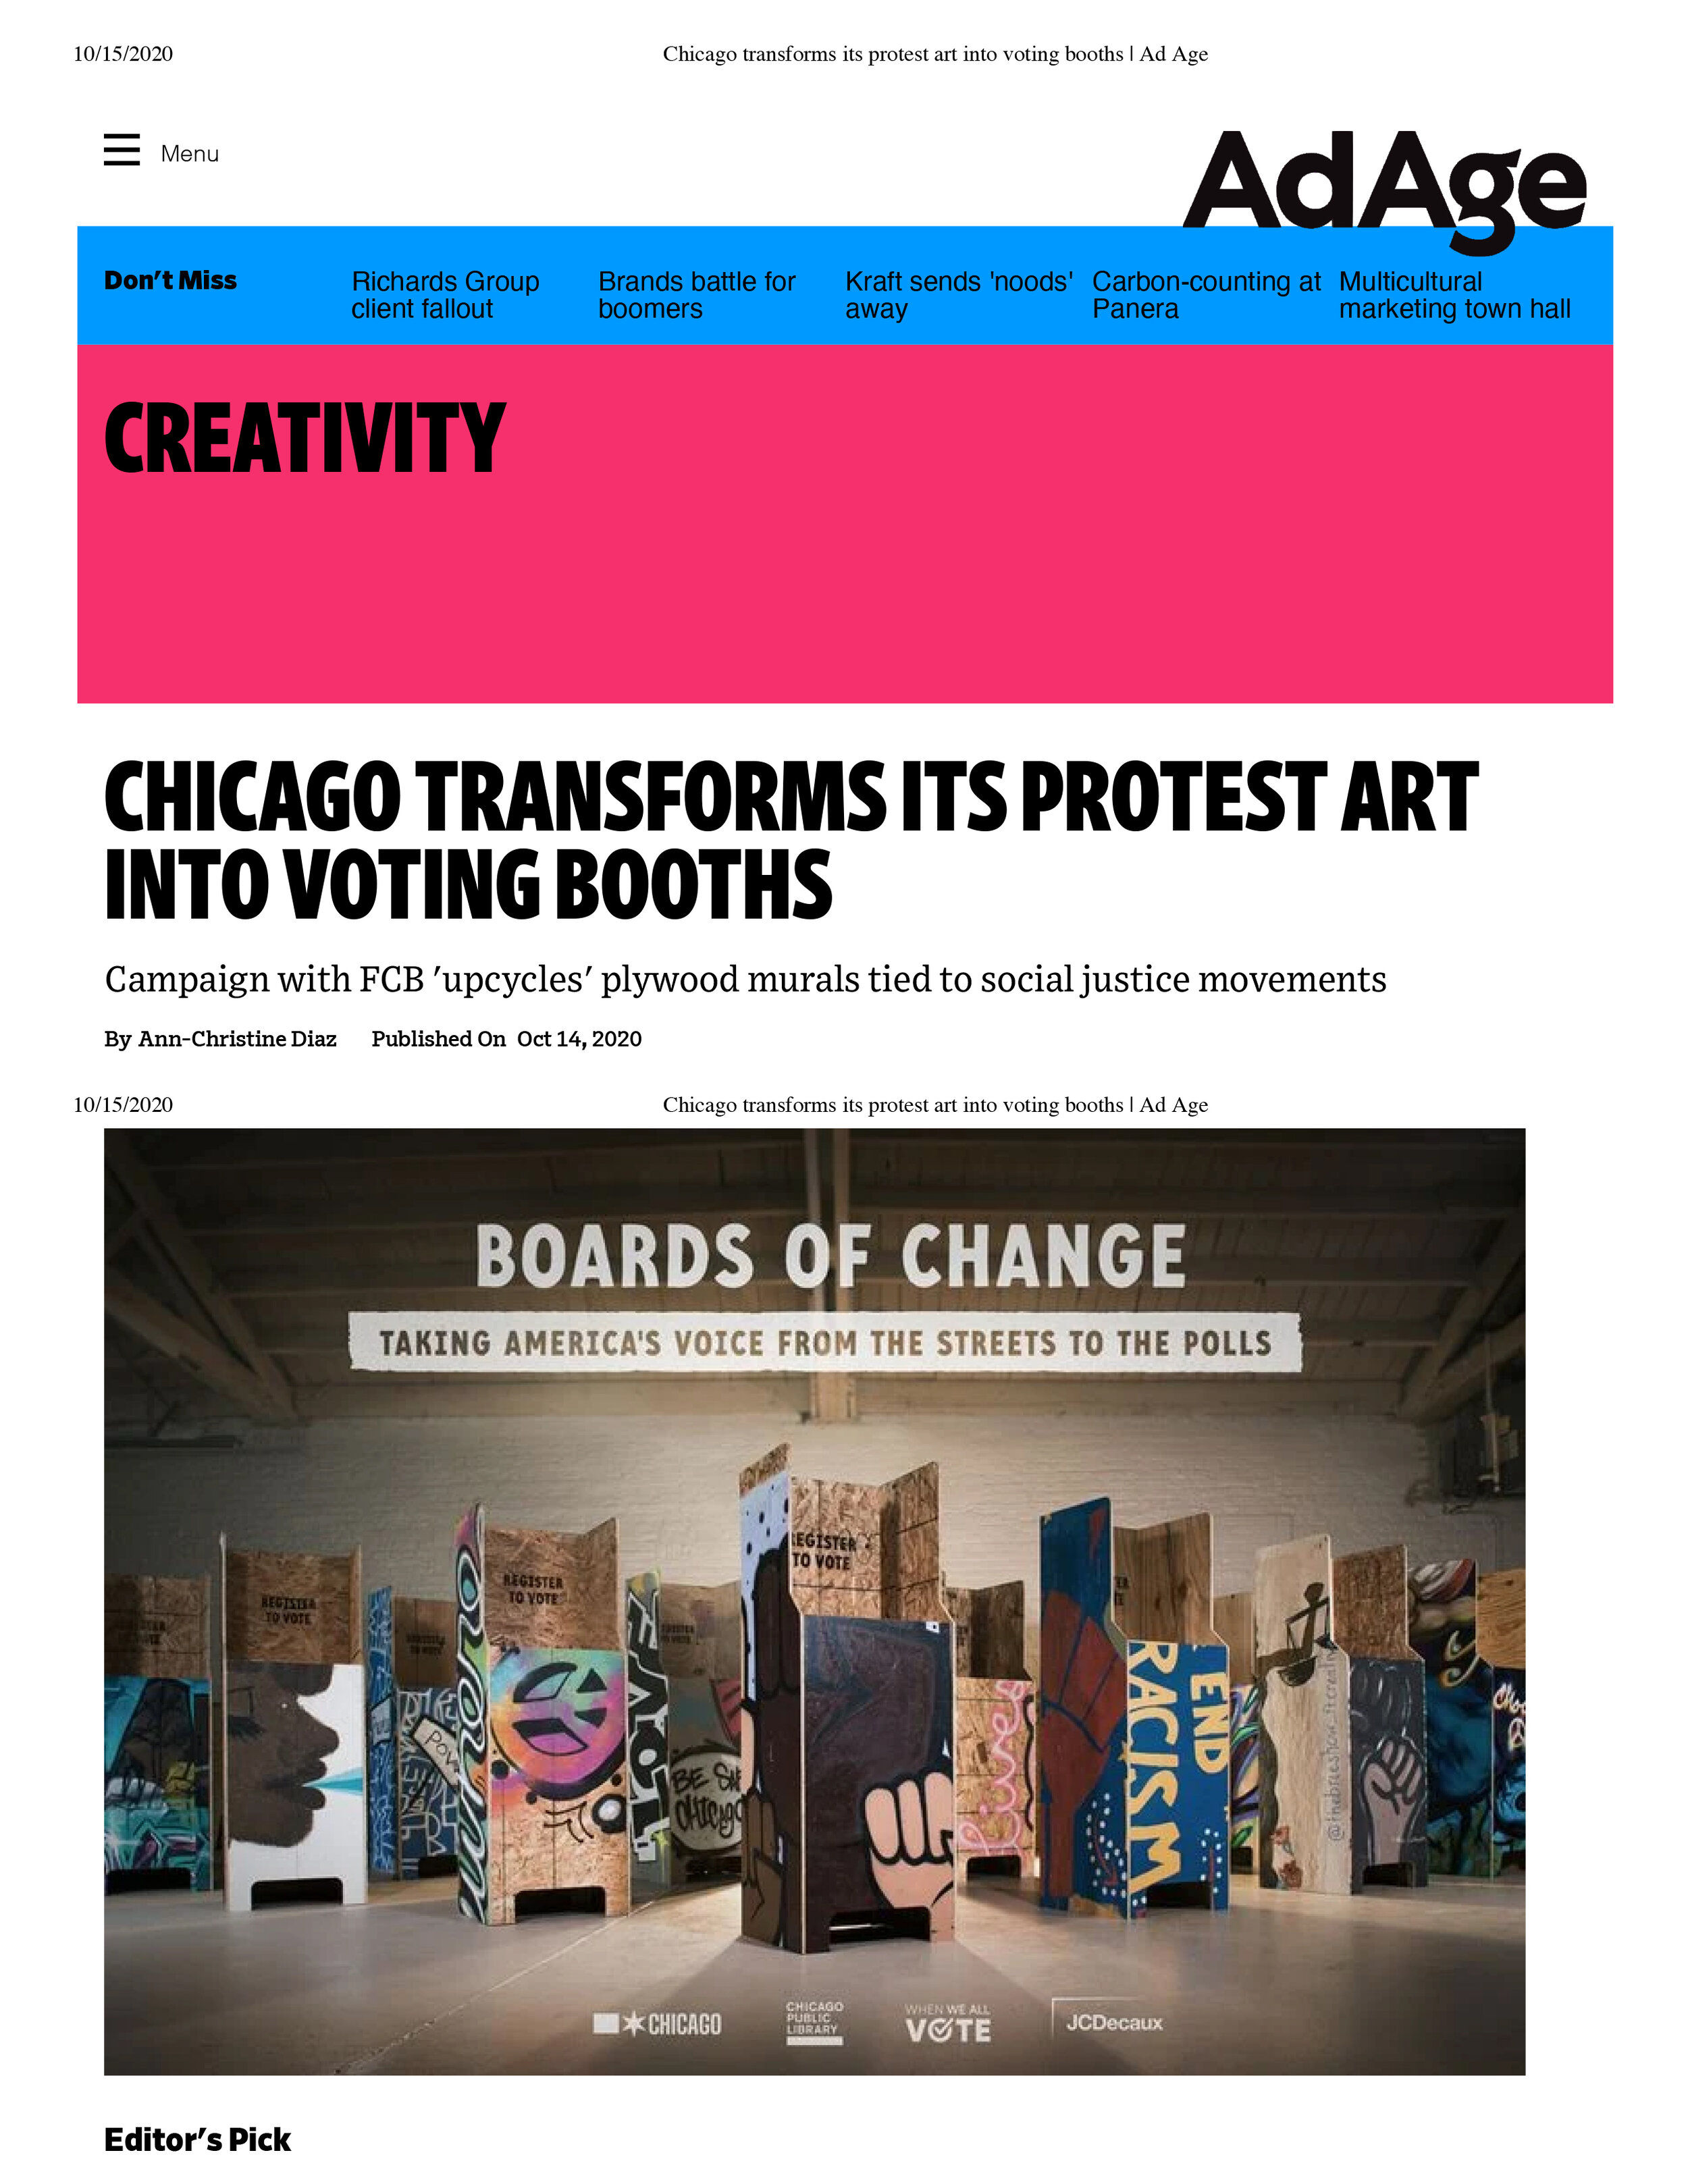 Chicago transforms its protest art into voting booths _ Ad Age-1.jpg